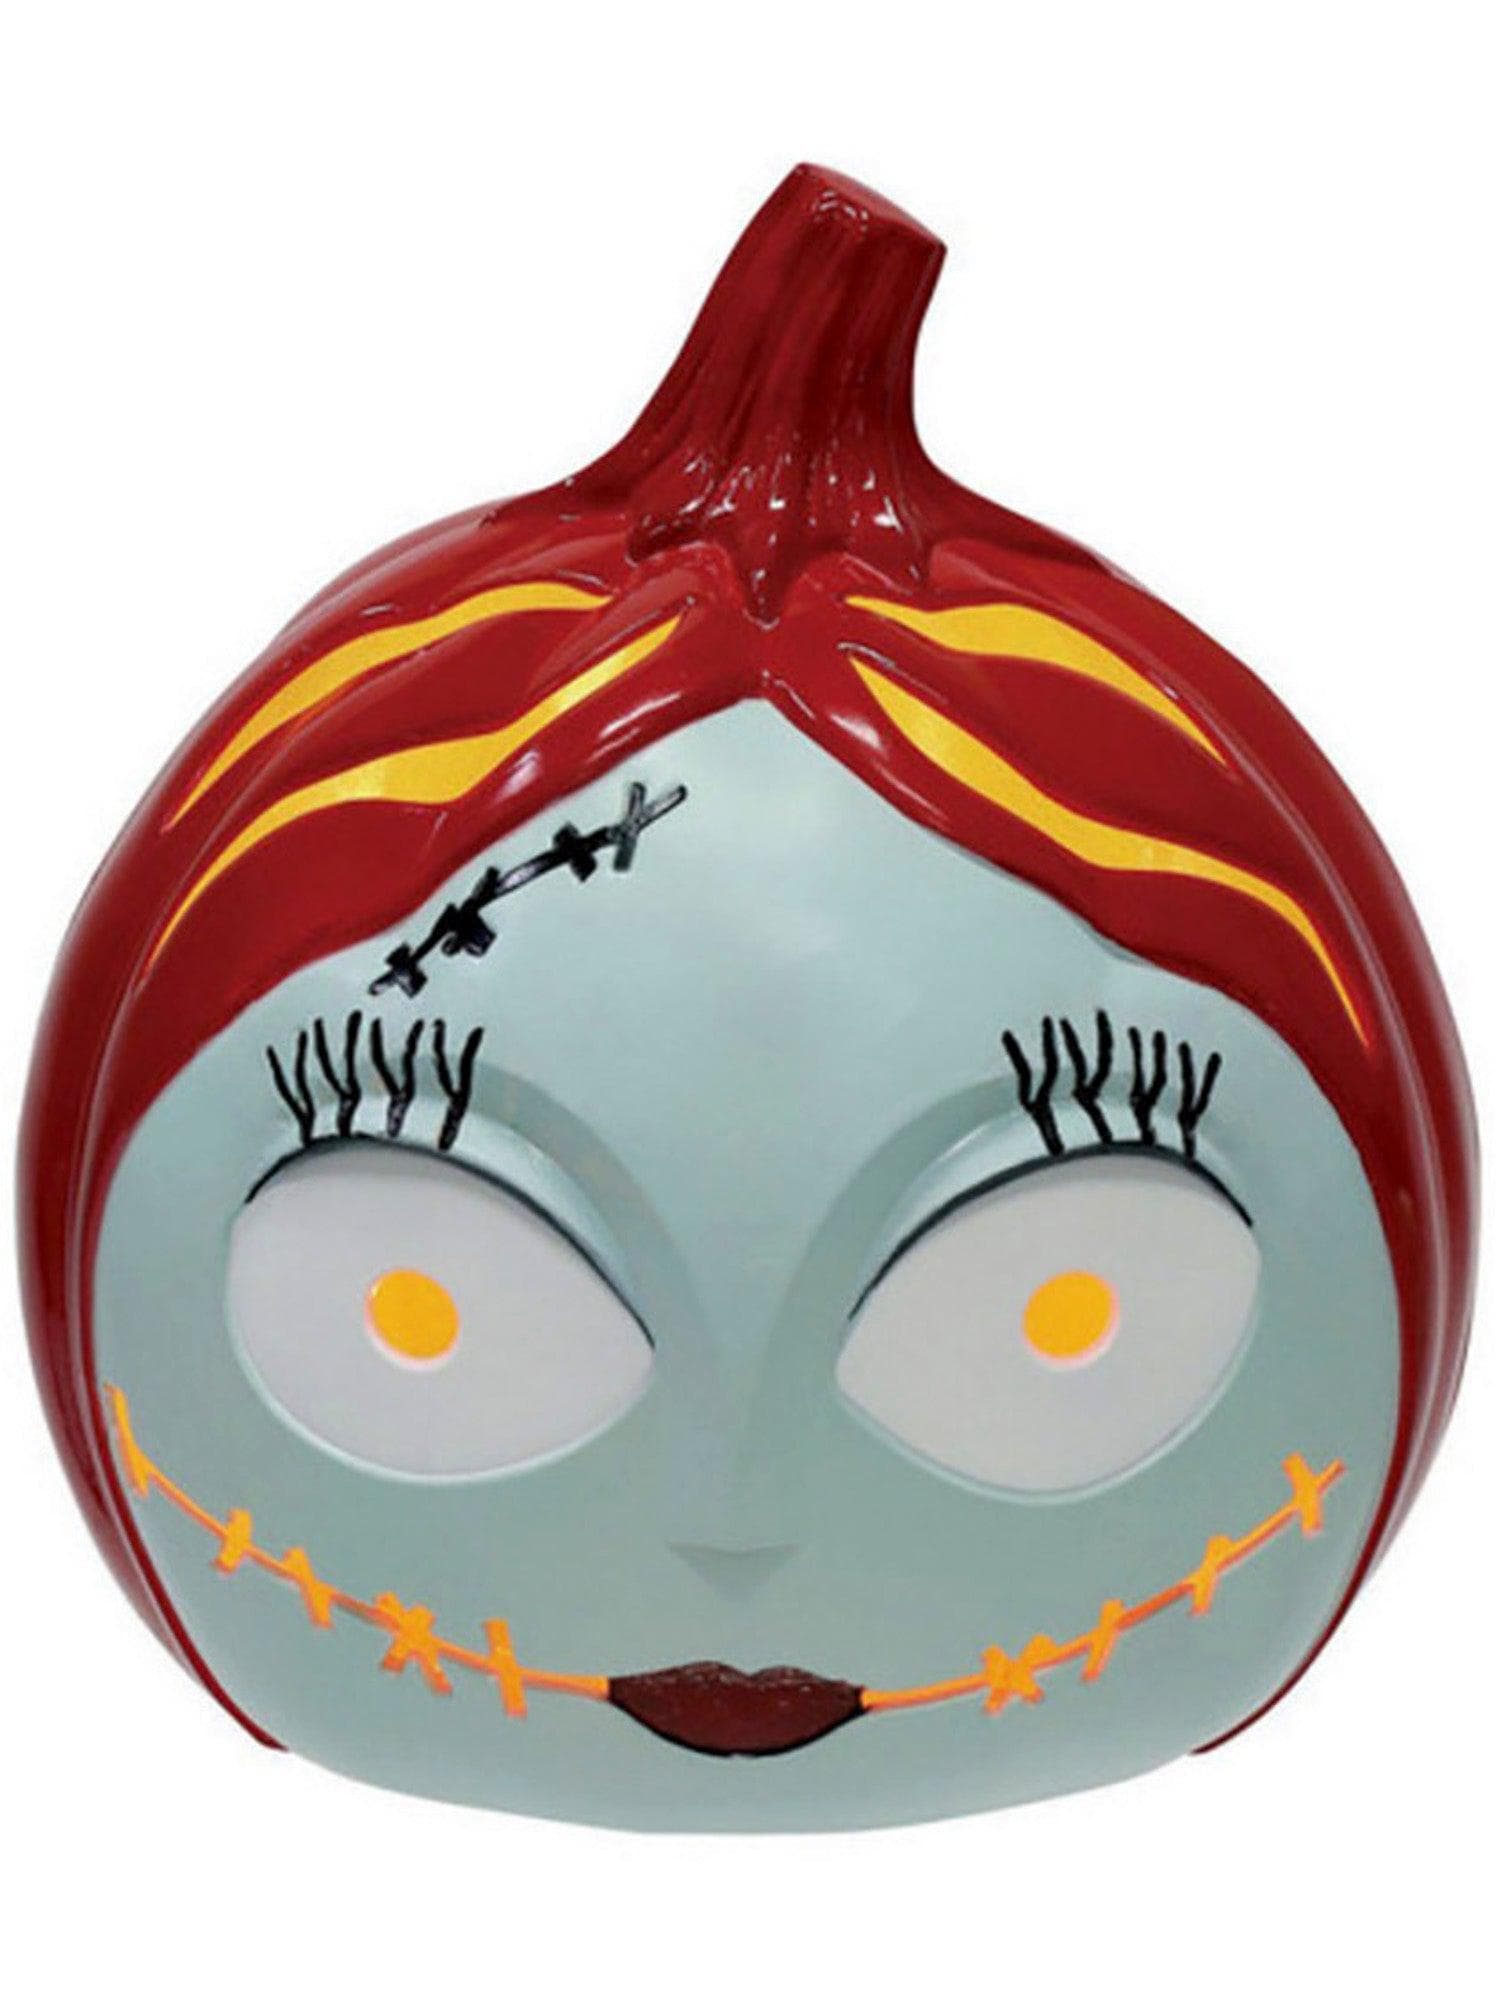 6 Inch The Nightmare Before Christmas Sally Light Up Pumpkin - costumes.com